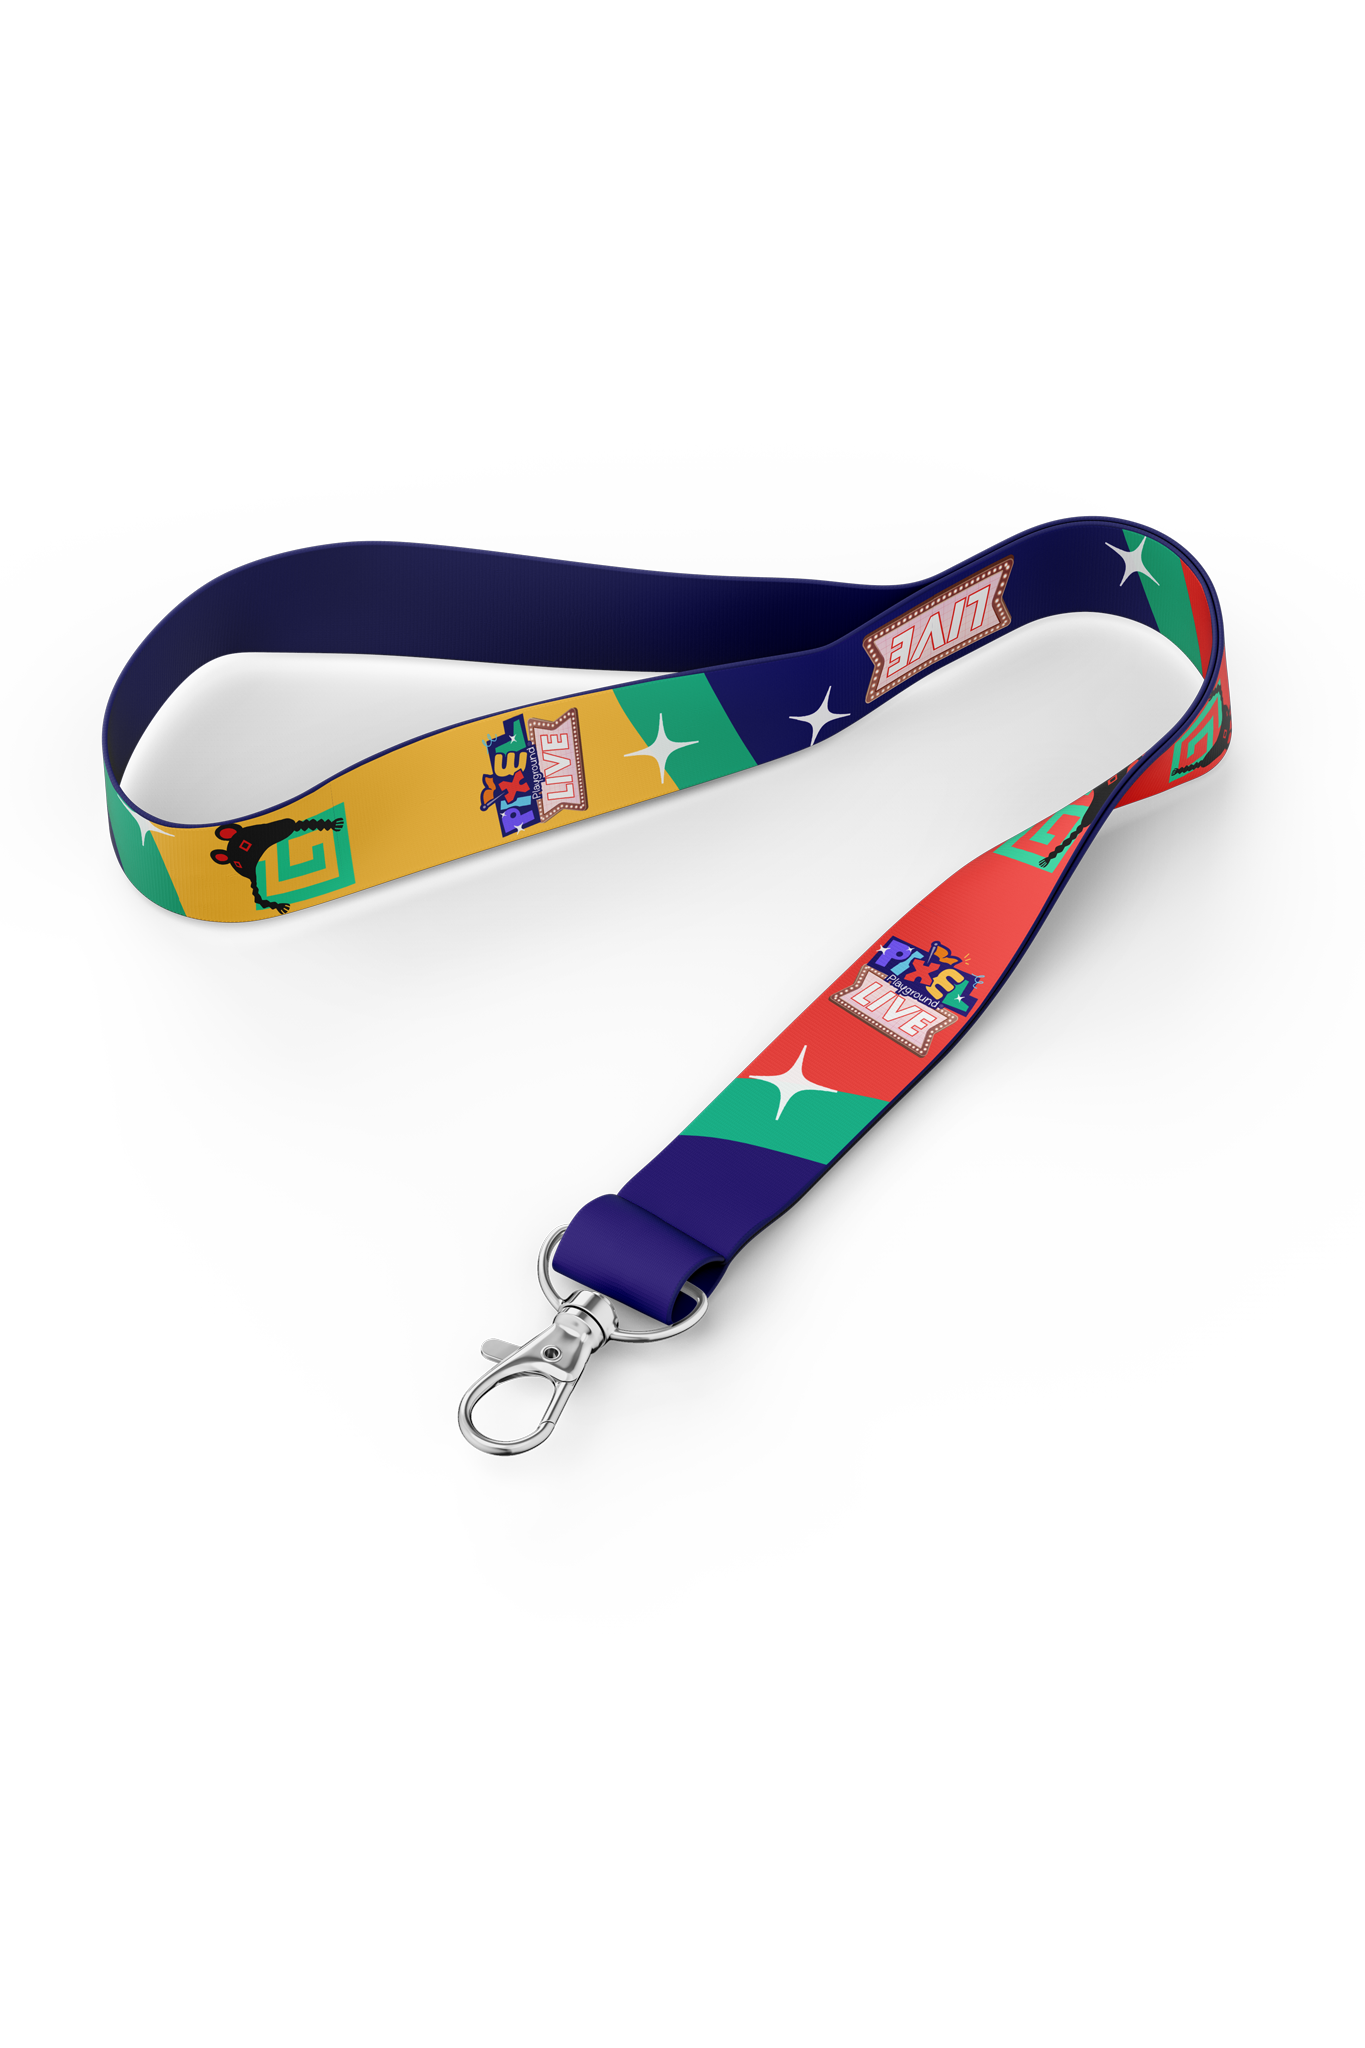 Lanyard featuring the Pixel Playground logo and colors.